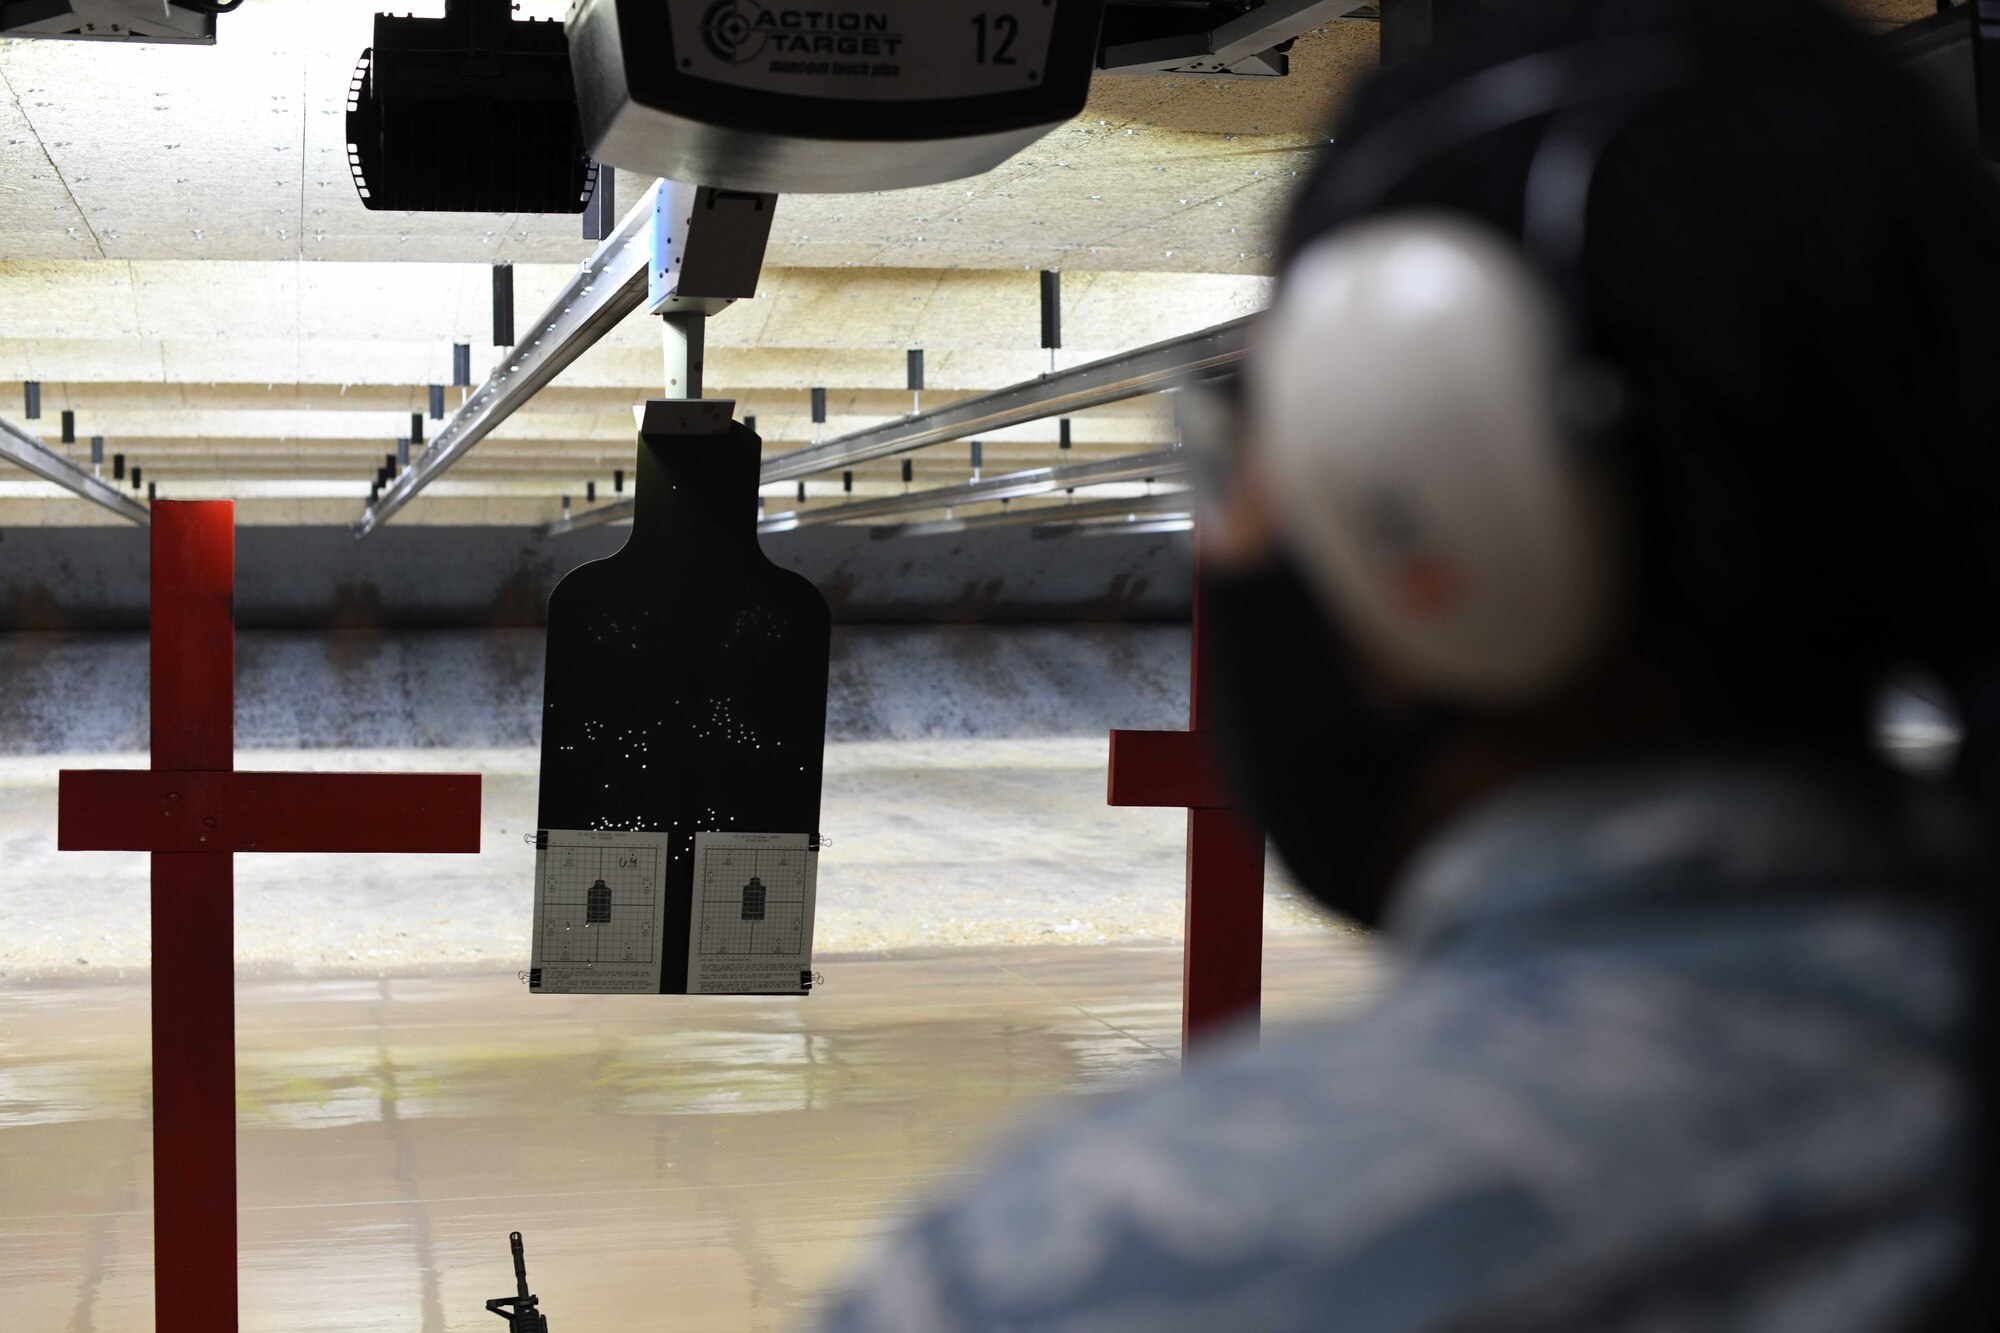 Airman First Class Jamier Willis, an aerospace medical service specialist from the 910th Medical Squadron, waits for her target to be racked and the order to approach her weapon, August 1, 2020, Youngstown Air Reserve Station’s Combat Arms Training and Maintenance firing range. Medical professionals are required to attend combat arms refresher training every 36 months.